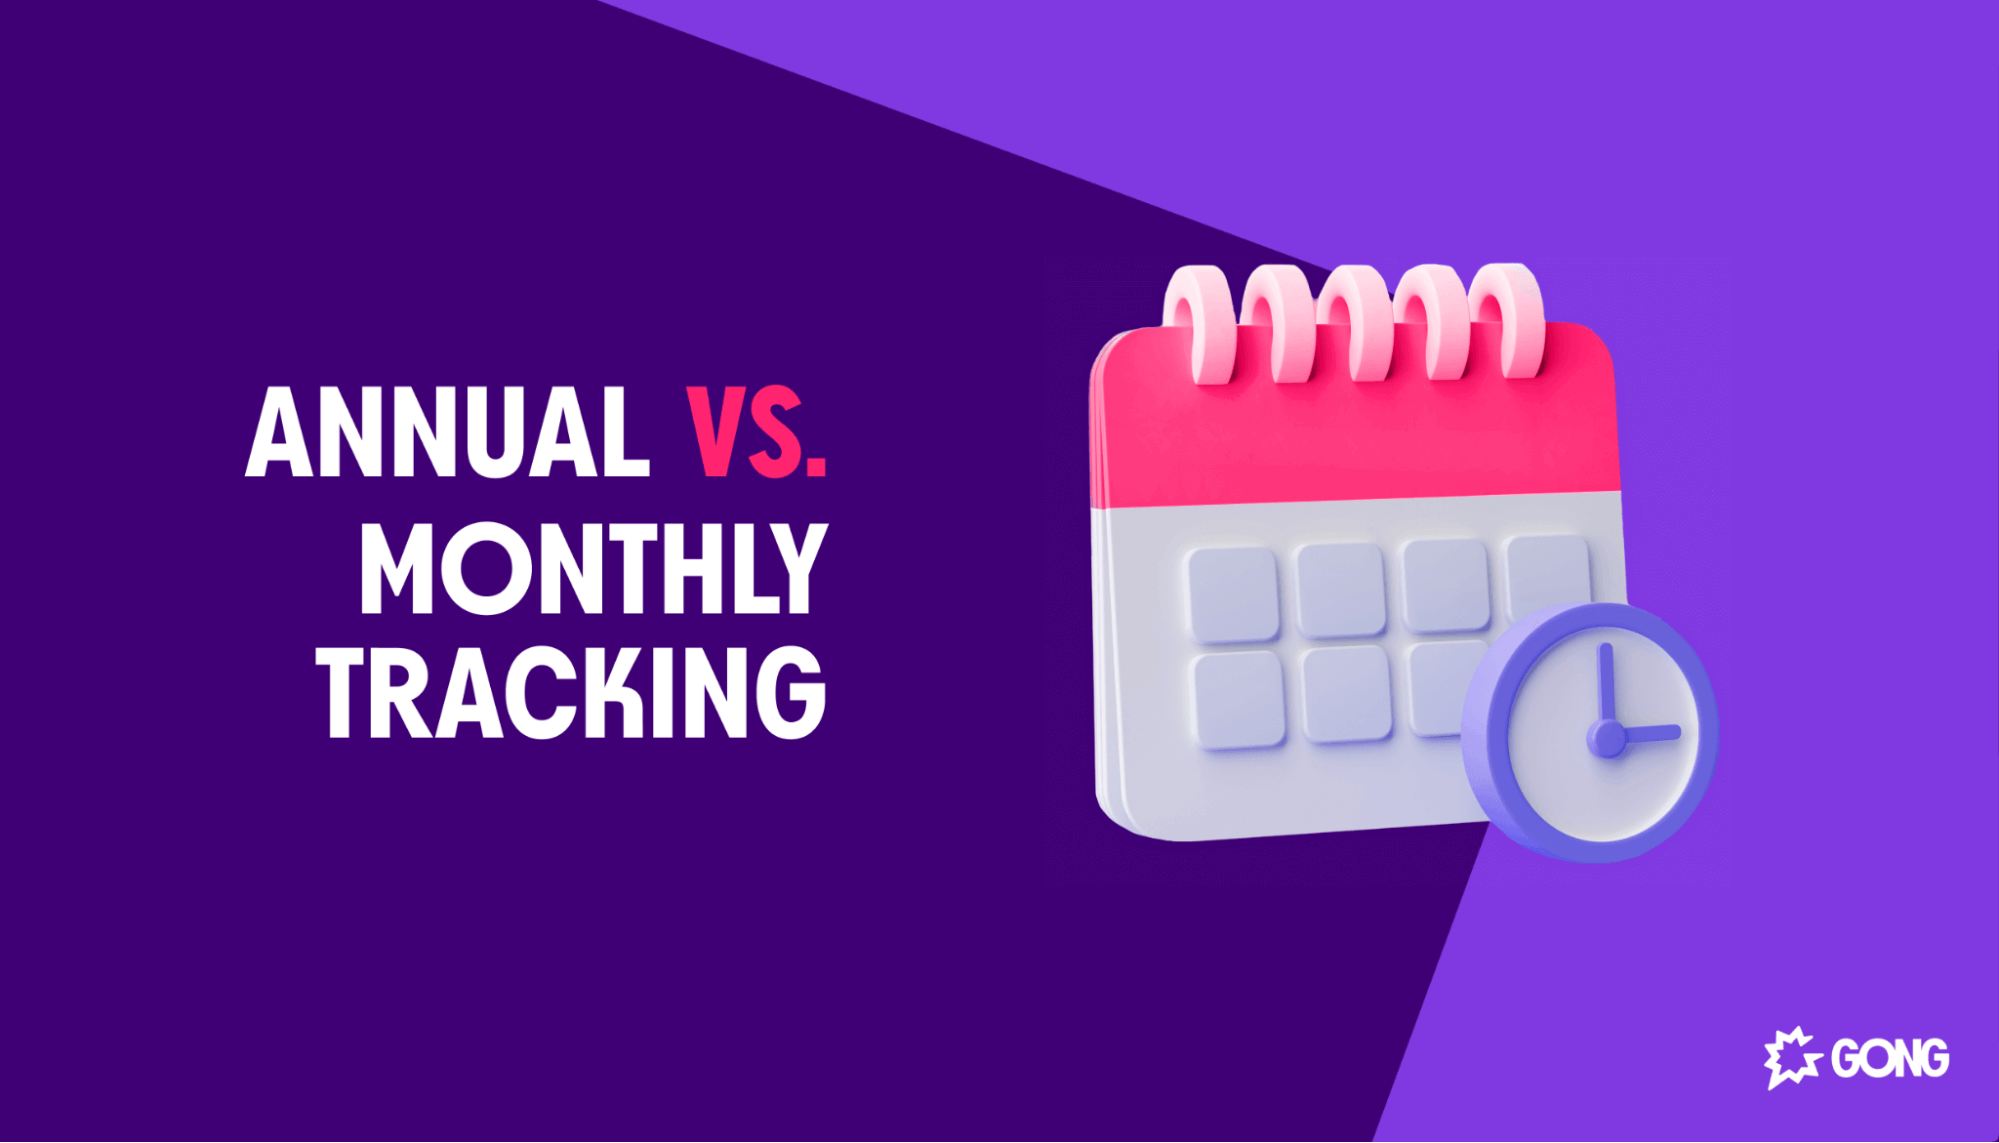 Monthly vs annual churn